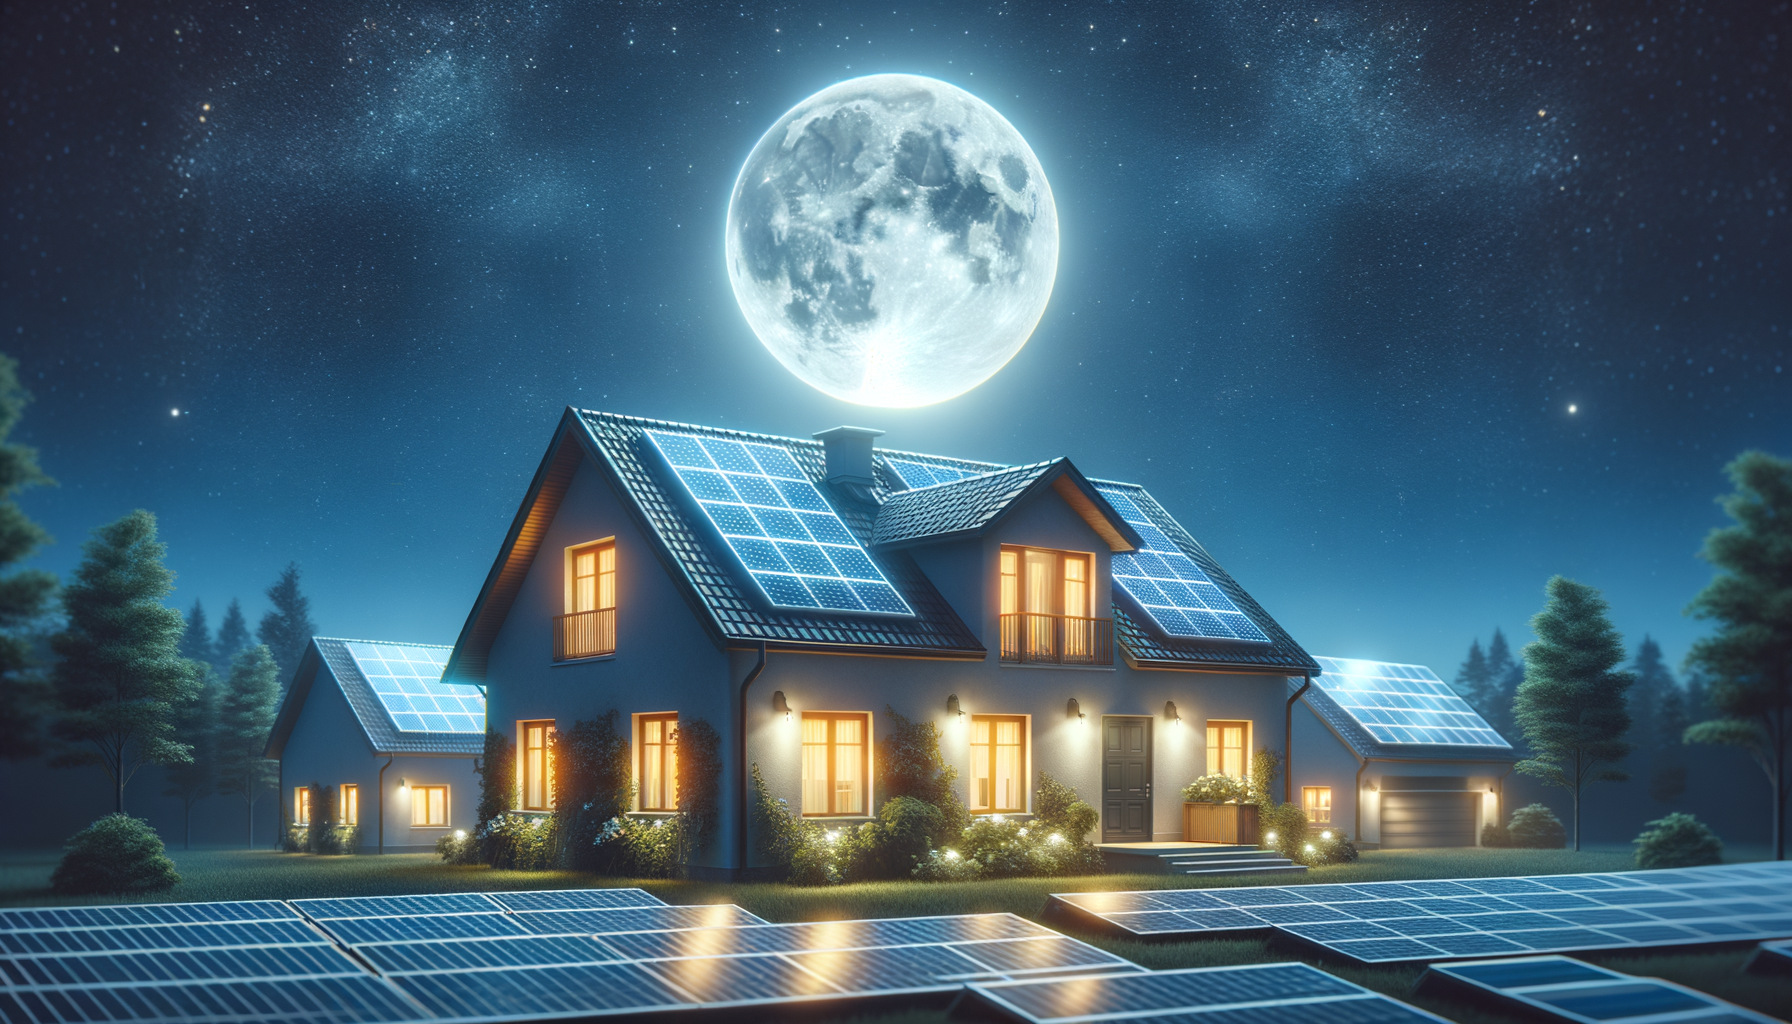 ALT: Solar panels with moonrise, representing the continuous energy supply at night